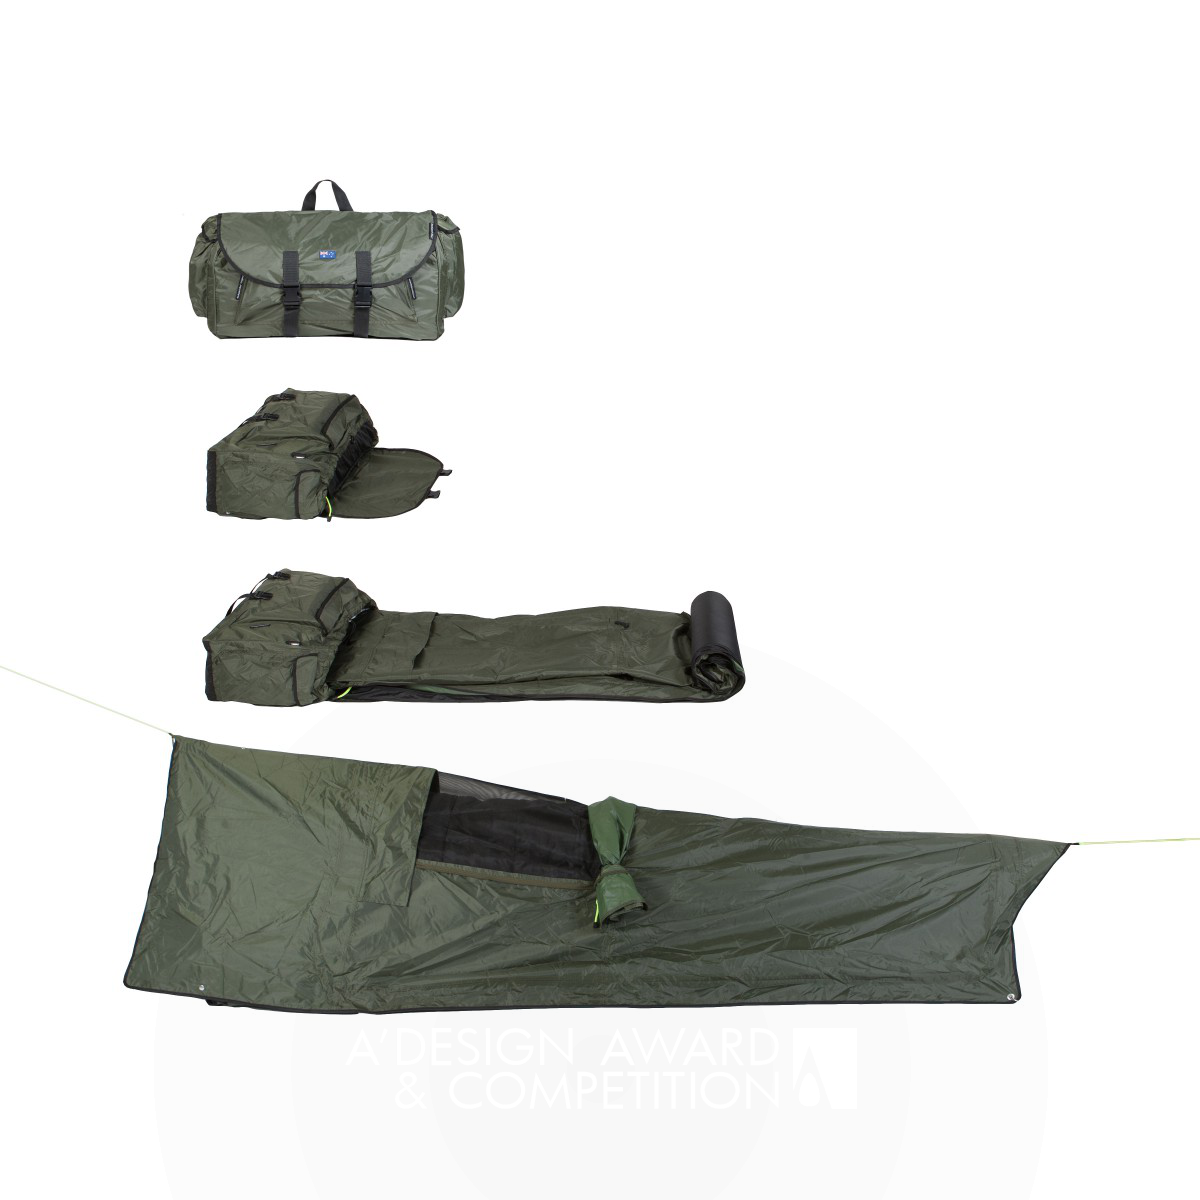 Backpack Bed™ Outdoor Portable Bed by Tony Clark and Lisa Clark